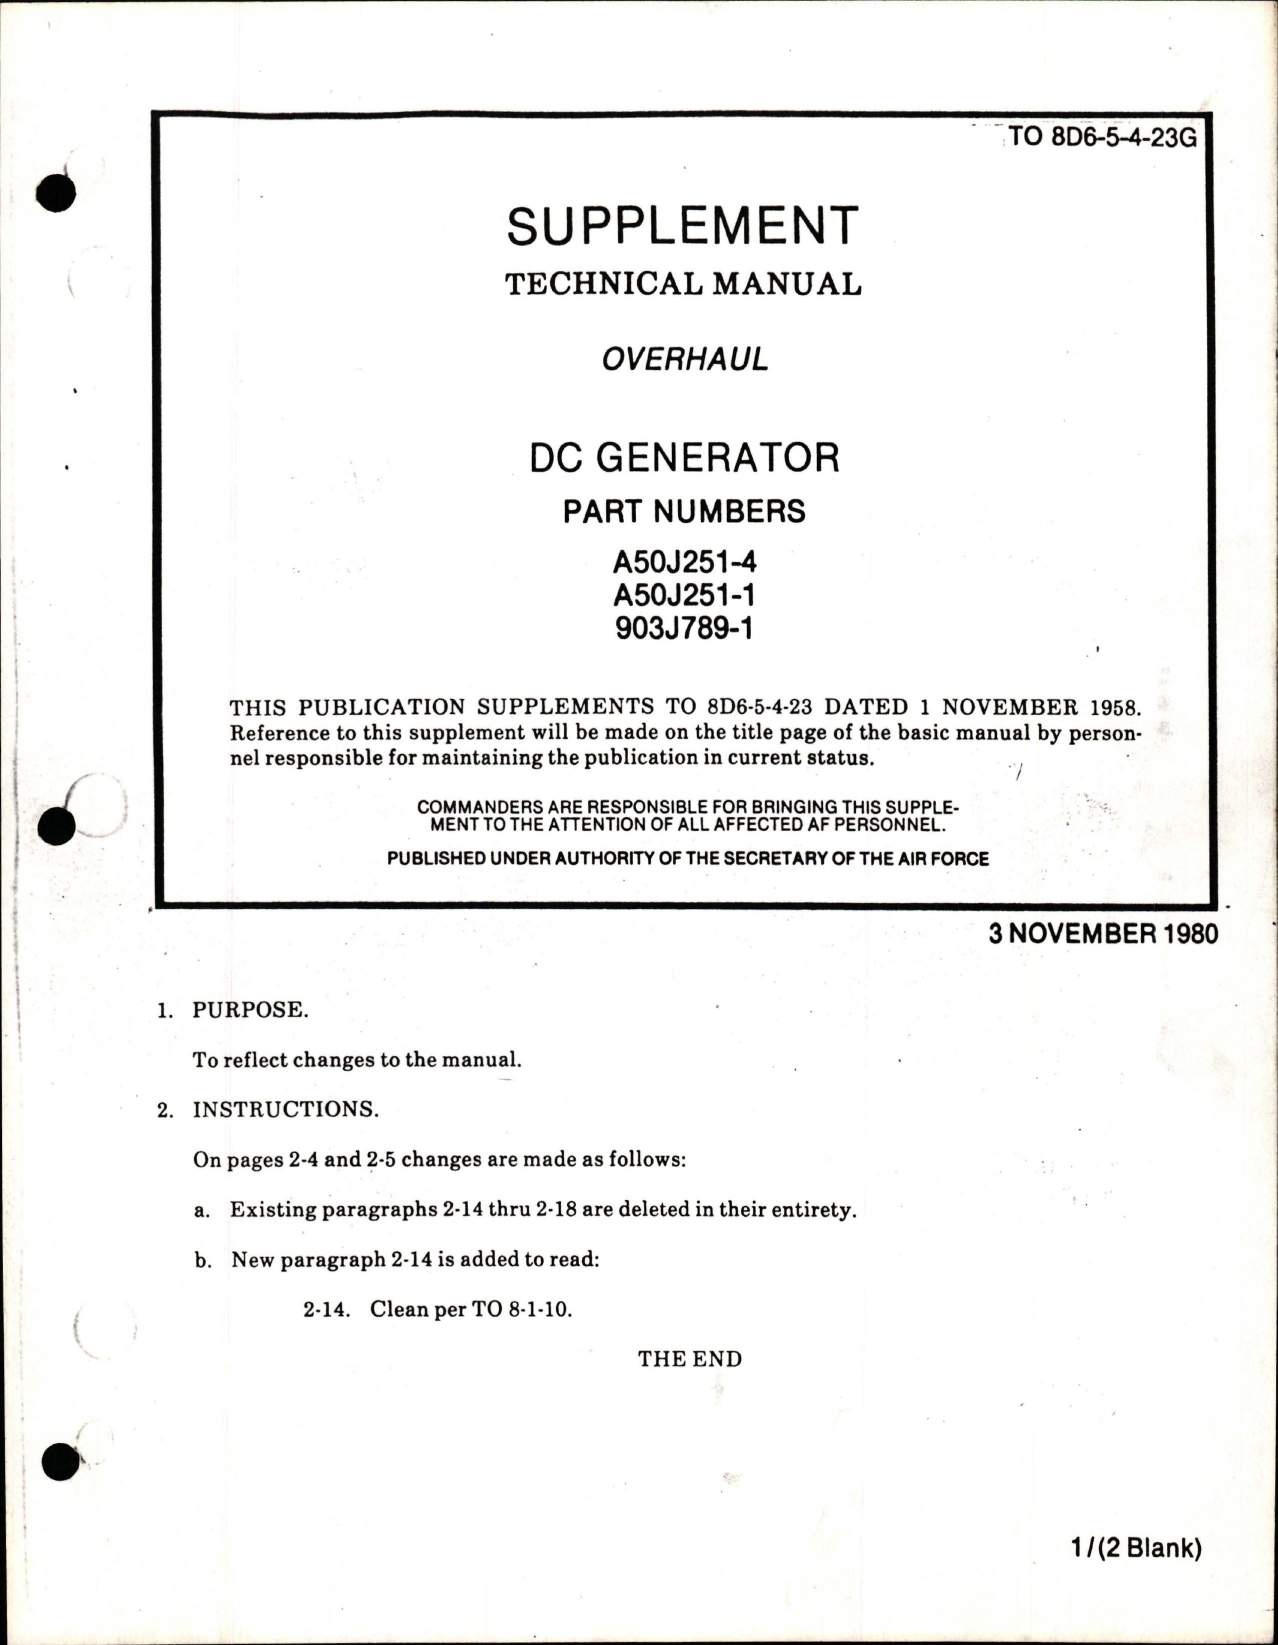 Sample page 1 from AirCorps Library document: Supplement to Overhaul for DC Generator - Parts A50J251-4, A50J251-1, and 903J789-1